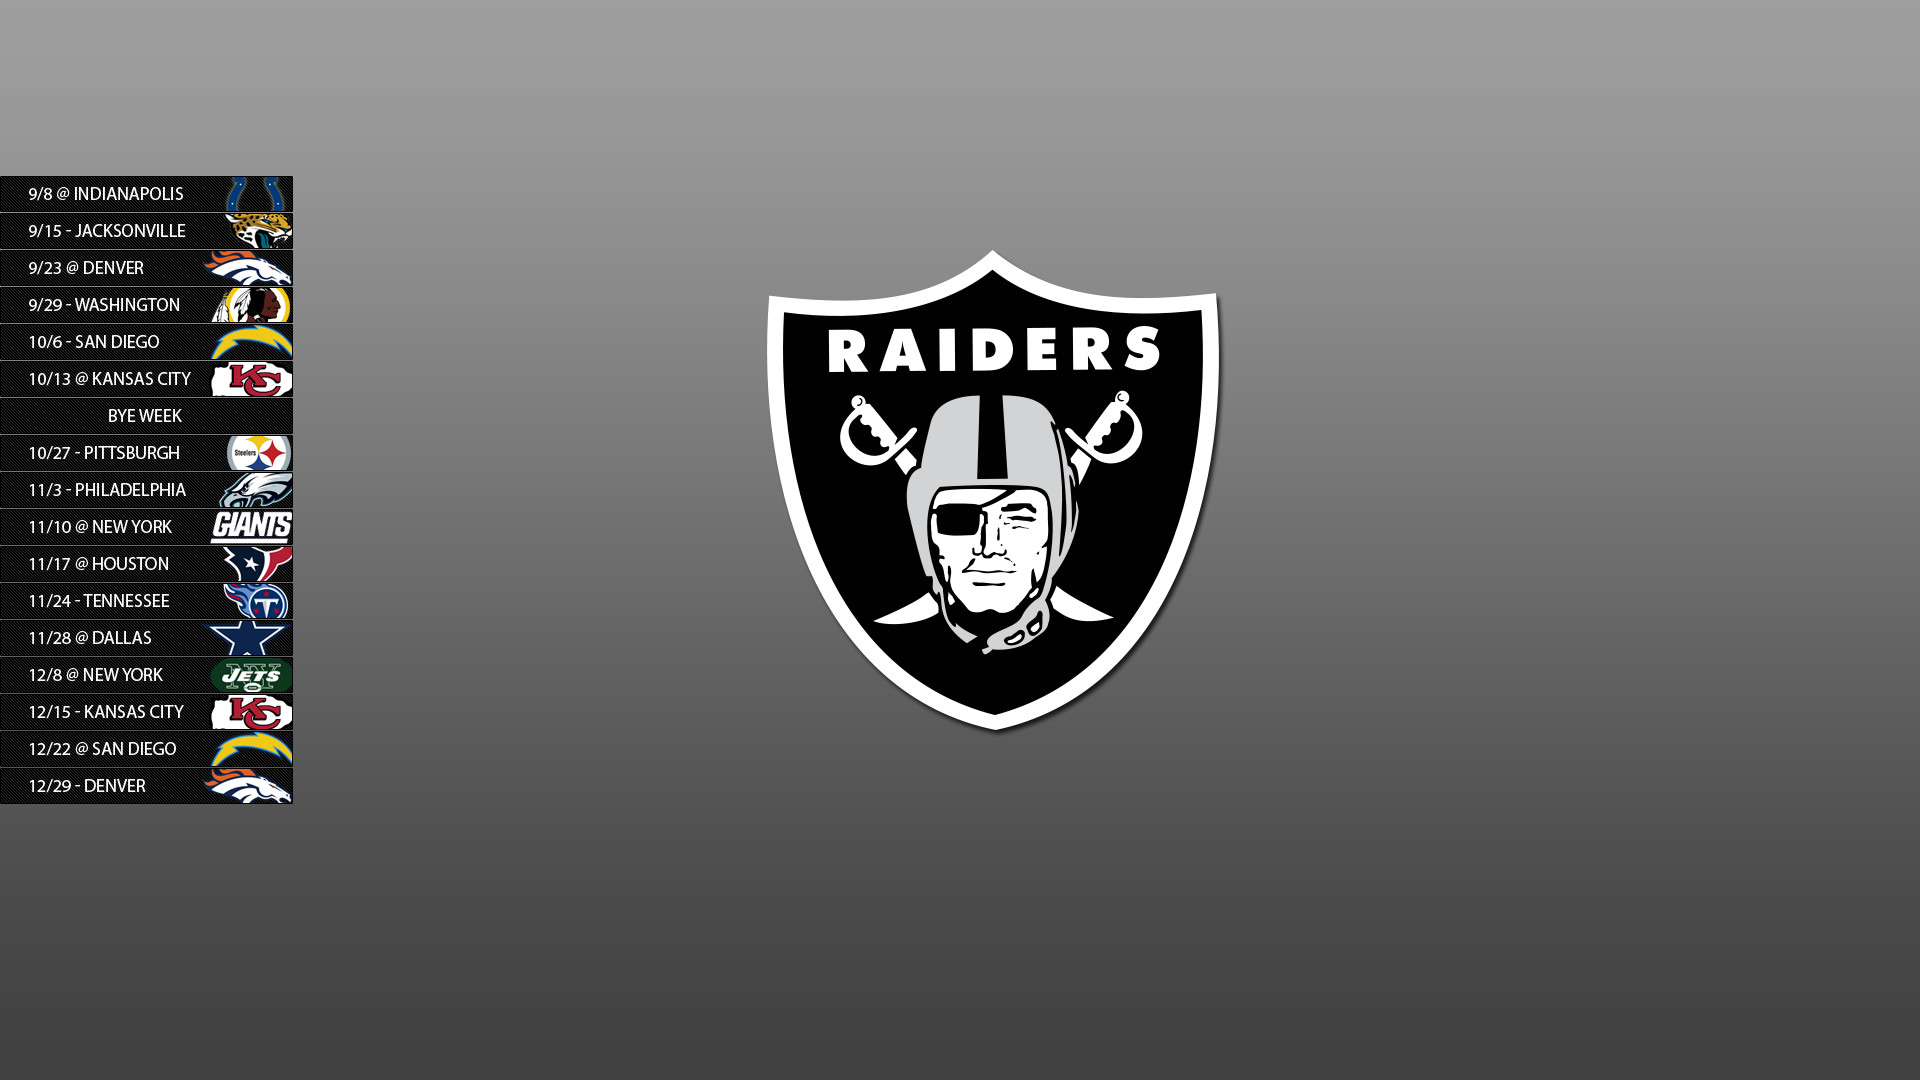 1920x1080 I thought I would share a 2013 Raiders schedule wallpaper I made.